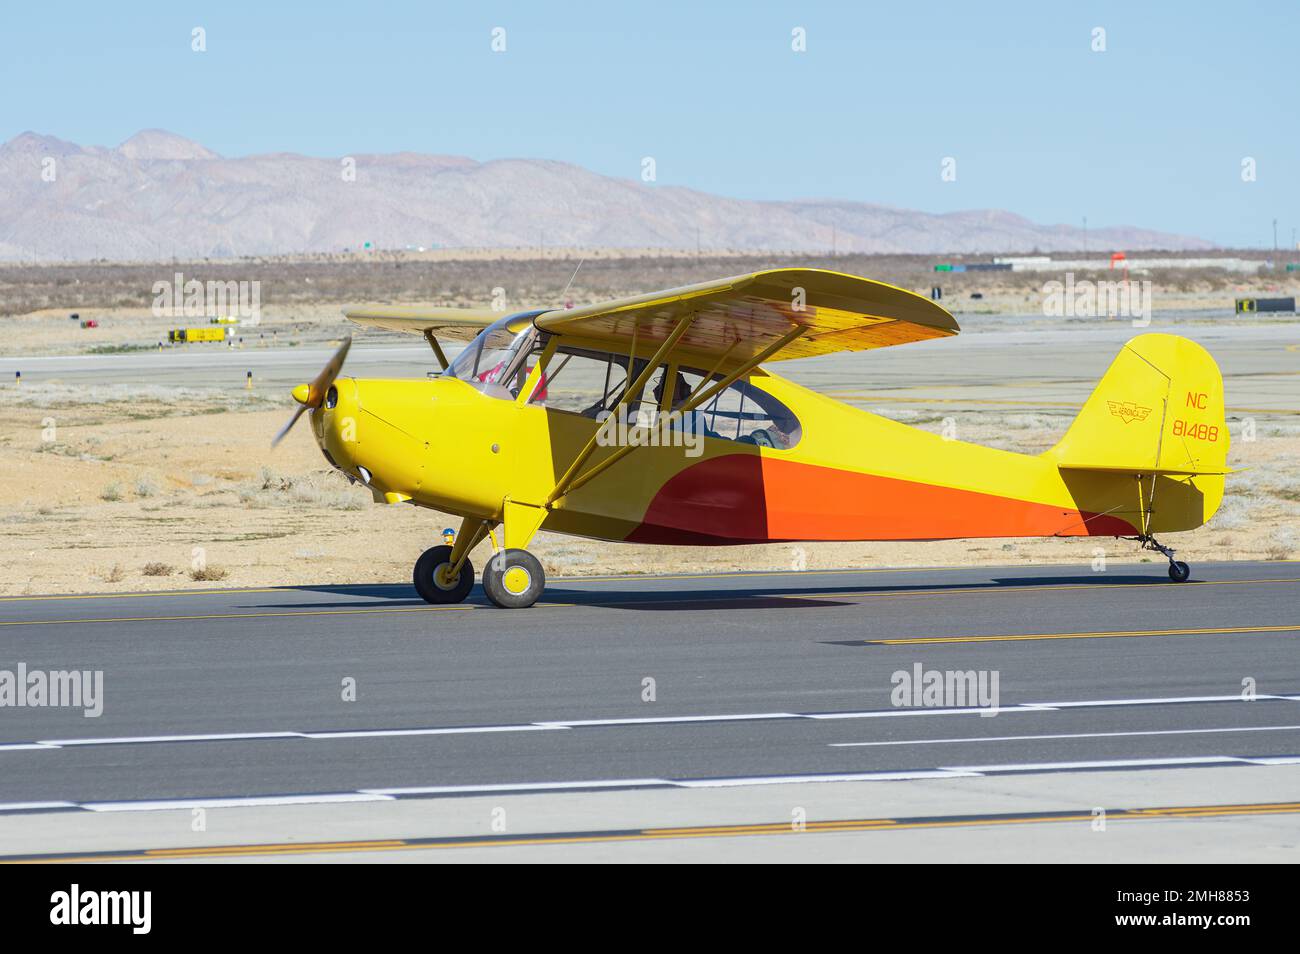 Mojave Air and Space Port. 1945 Aeronca 7AC vintage aircraft with registration N81488 shown taxiing. Stock Photo